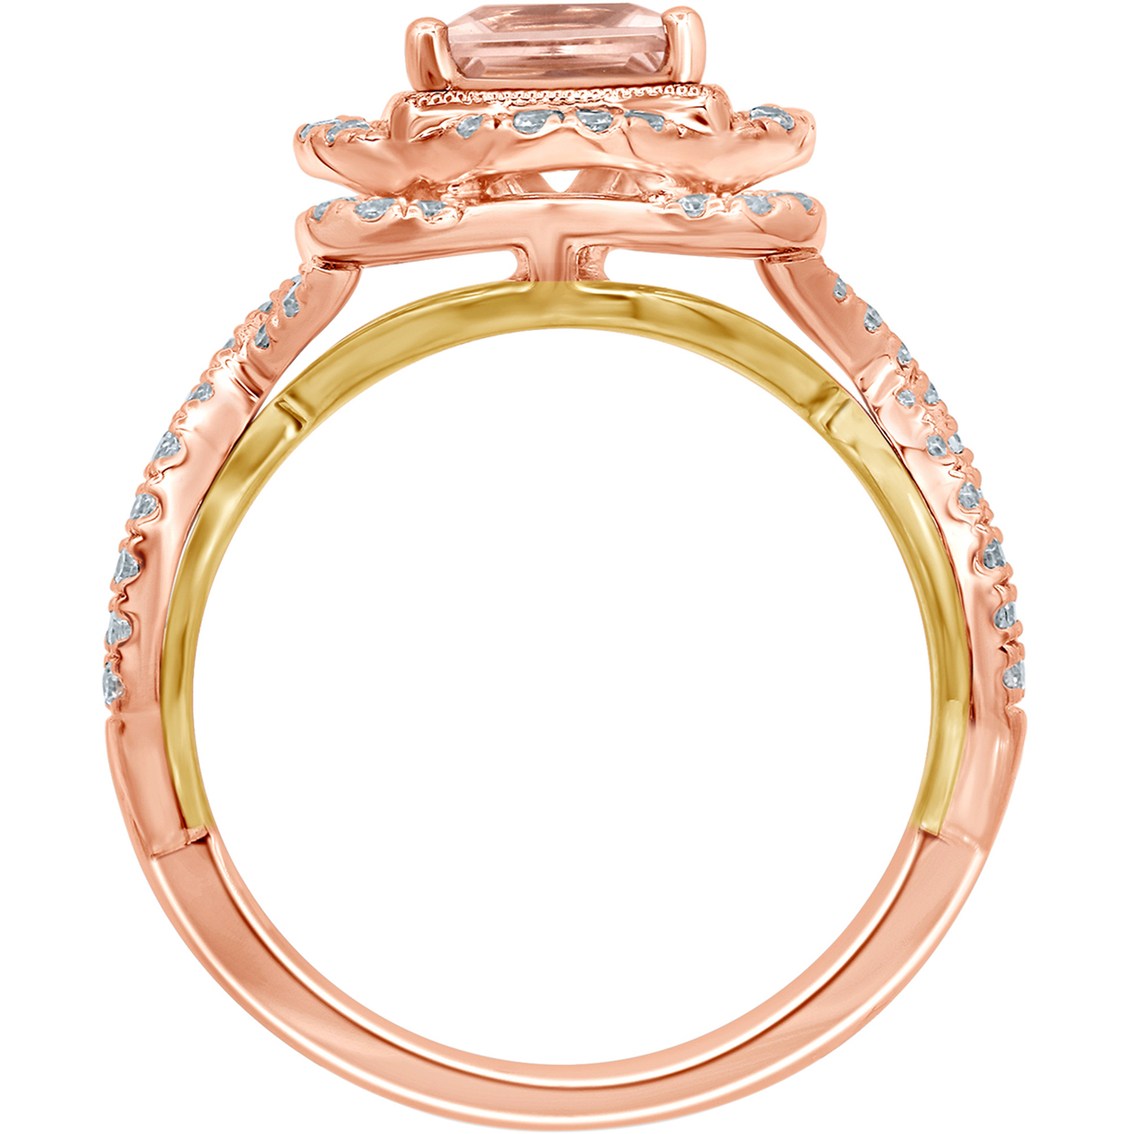 Truly Zac Posen 14K Two Tone Gold Morganite and 1/2 CTW Diamond Engagement Ring - Image 3 of 3